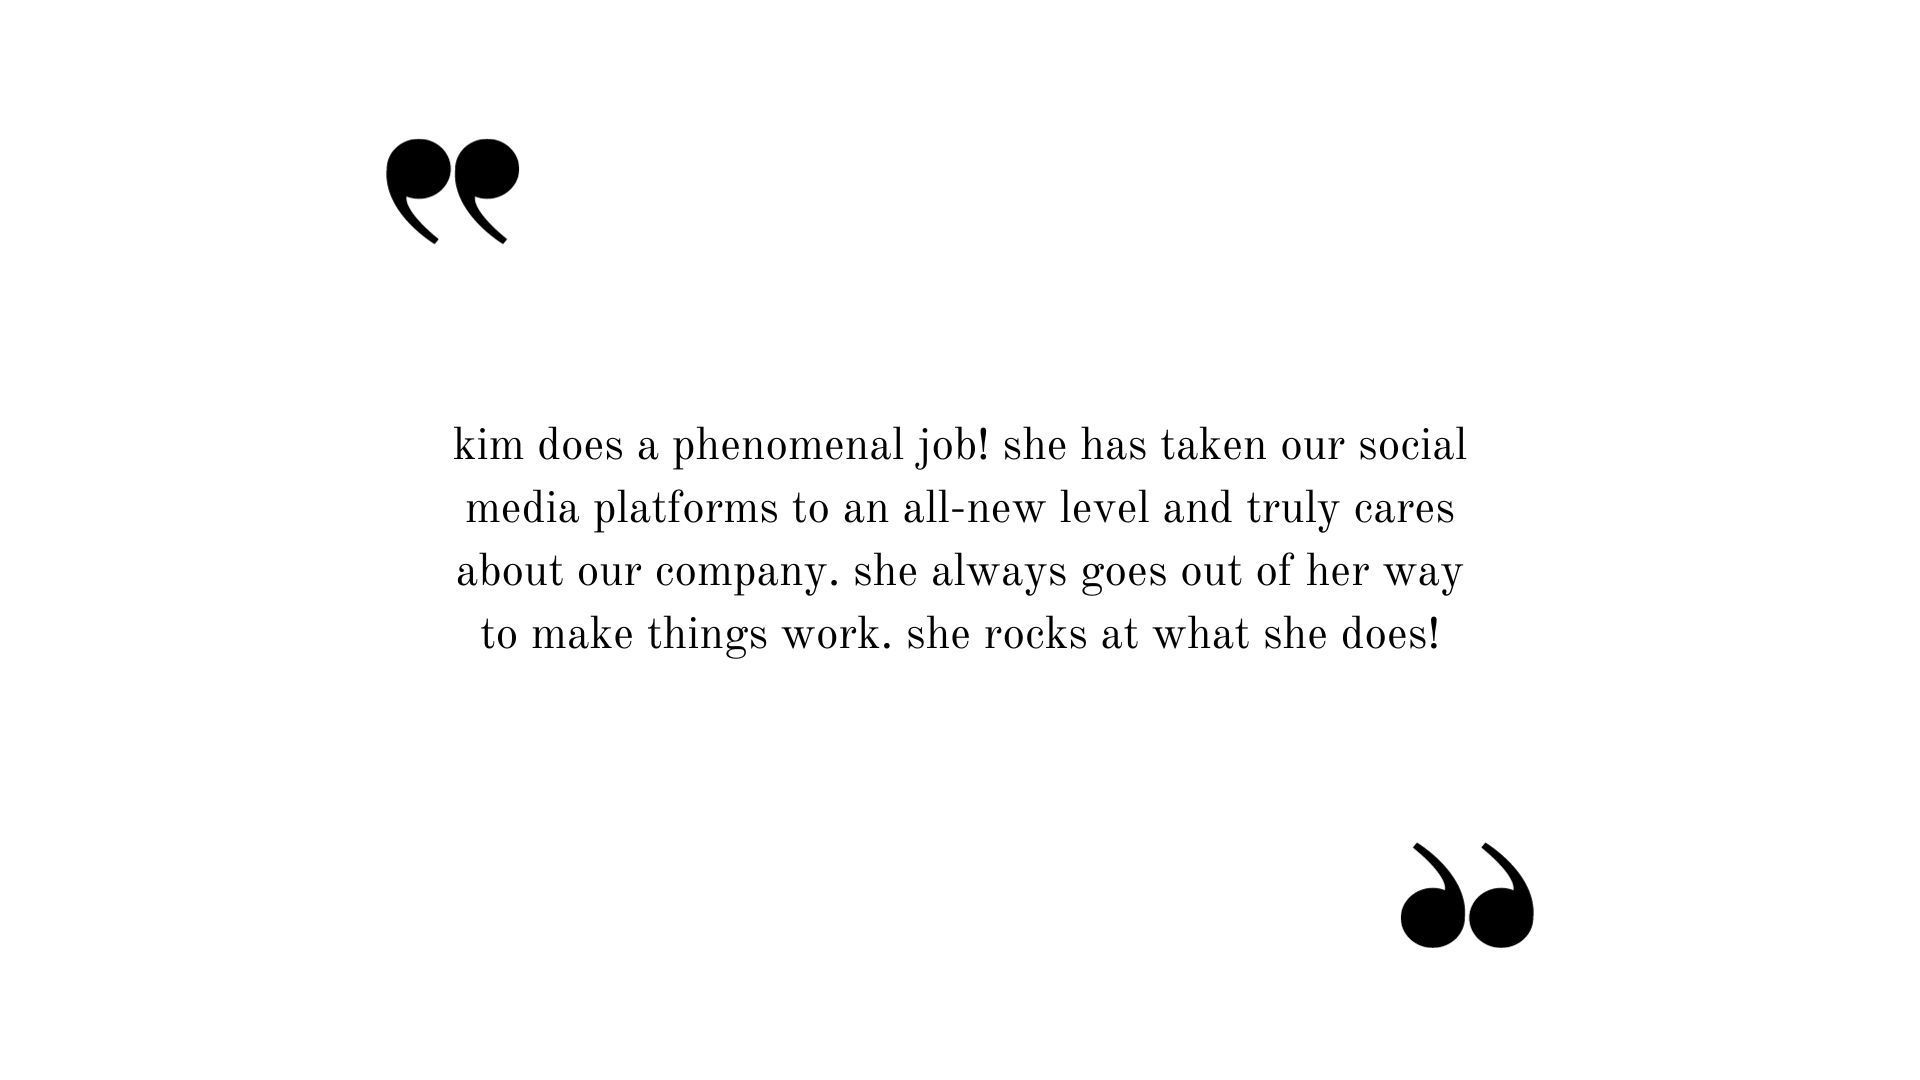 Testimonial: Kim does a phenomenal job! She has taken our social media platforms to an all-new level and truly cares about our company. She always goes out of her way to make things work. She rocks at what she does!!